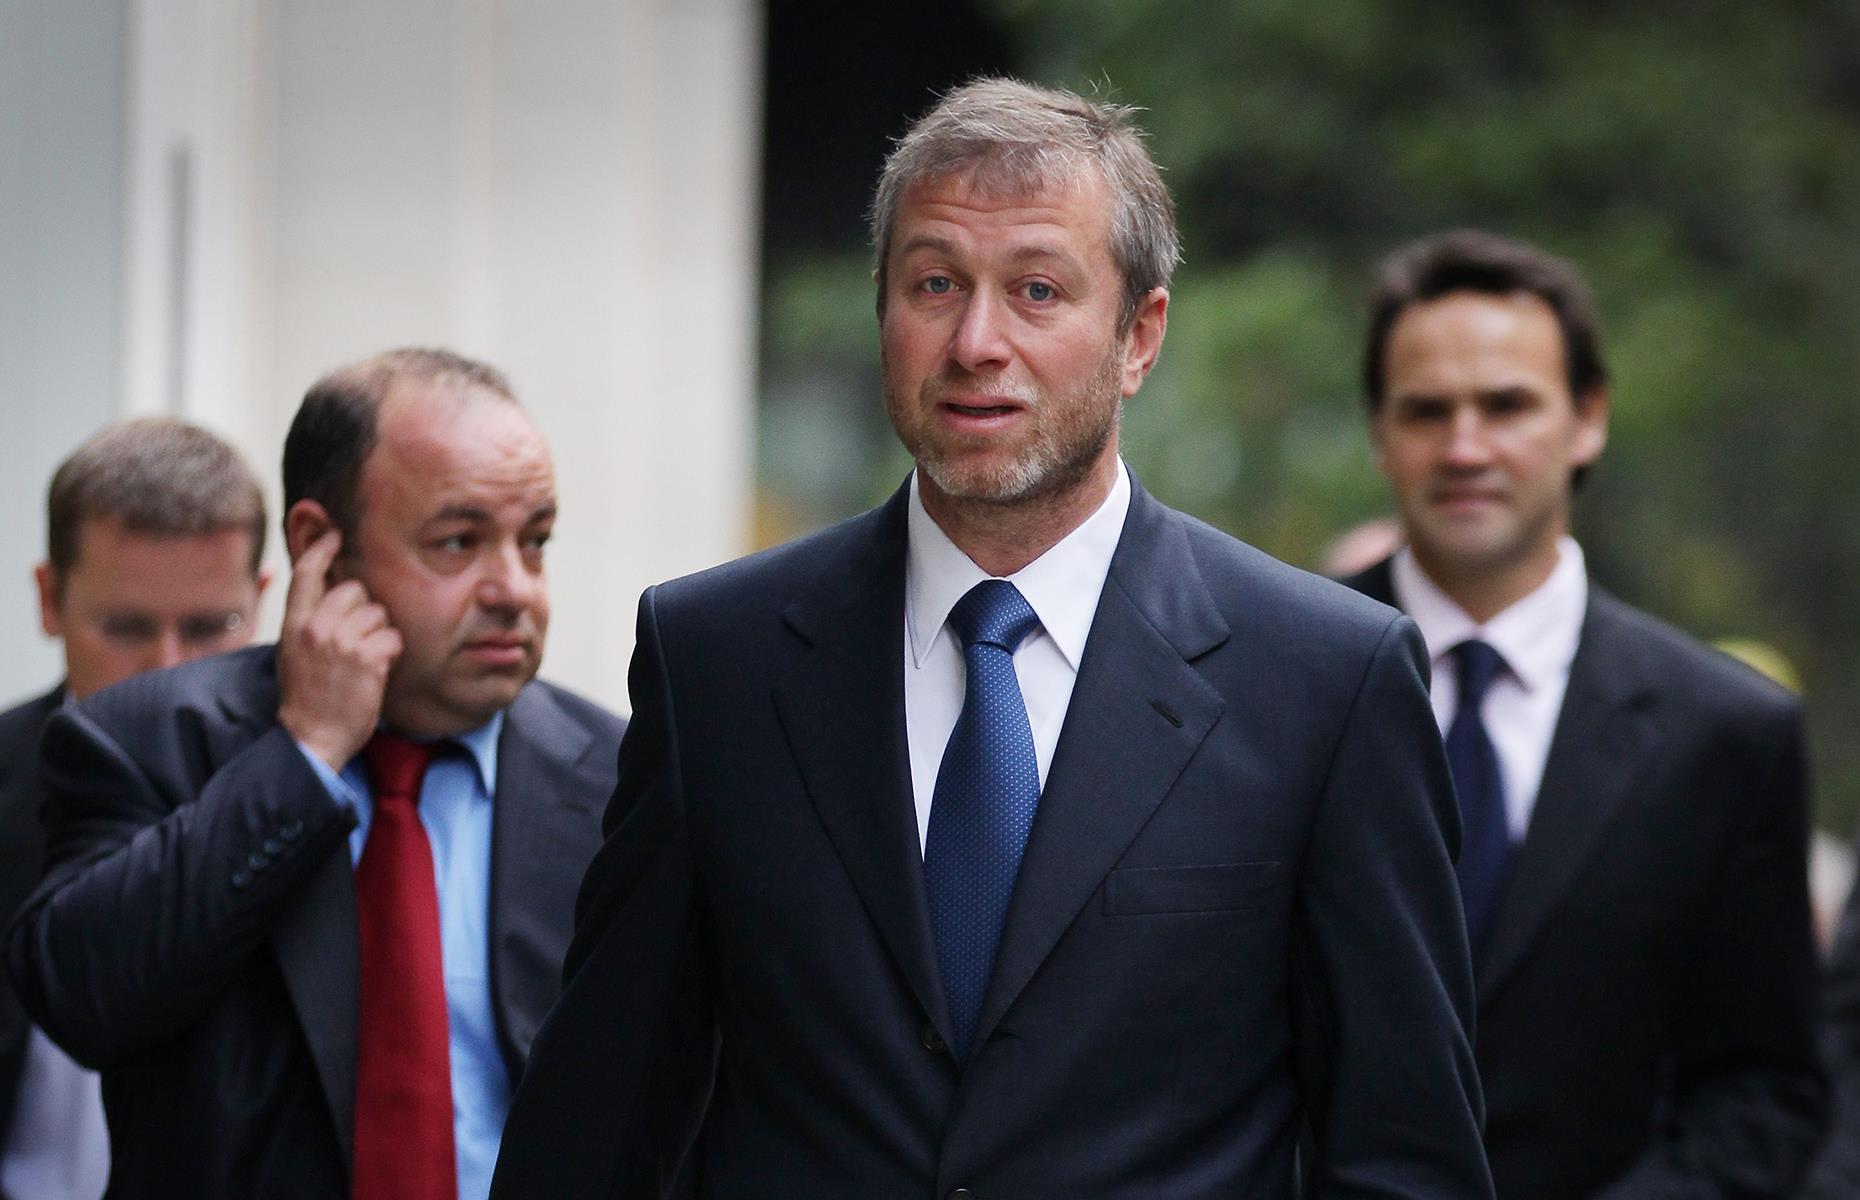 <p>Unfortunately for him, Abramovich's Dreamliner has had very little use so far.</p>  <p>With Russia invading Ukraine mere months after his jet upgrade, the American government declared it would seize Abramovich's Boeing 787 (as well as his Gulfstream G650 ER), saying he flew the planes into Russia in March 2022 and violated economic sanctions.</p>  <p>The Boeing 787 is currently grounded in Dubai, with any firm that provides refueling or other aircraft services for it being in instant violation of the sanctions imposed by the US and Europe.</p>  <p>In addition to that, Boeing announced in March via a statement to CNN that it was "suspending parts, maintenance, and technical support services for Russian airlines." </p>